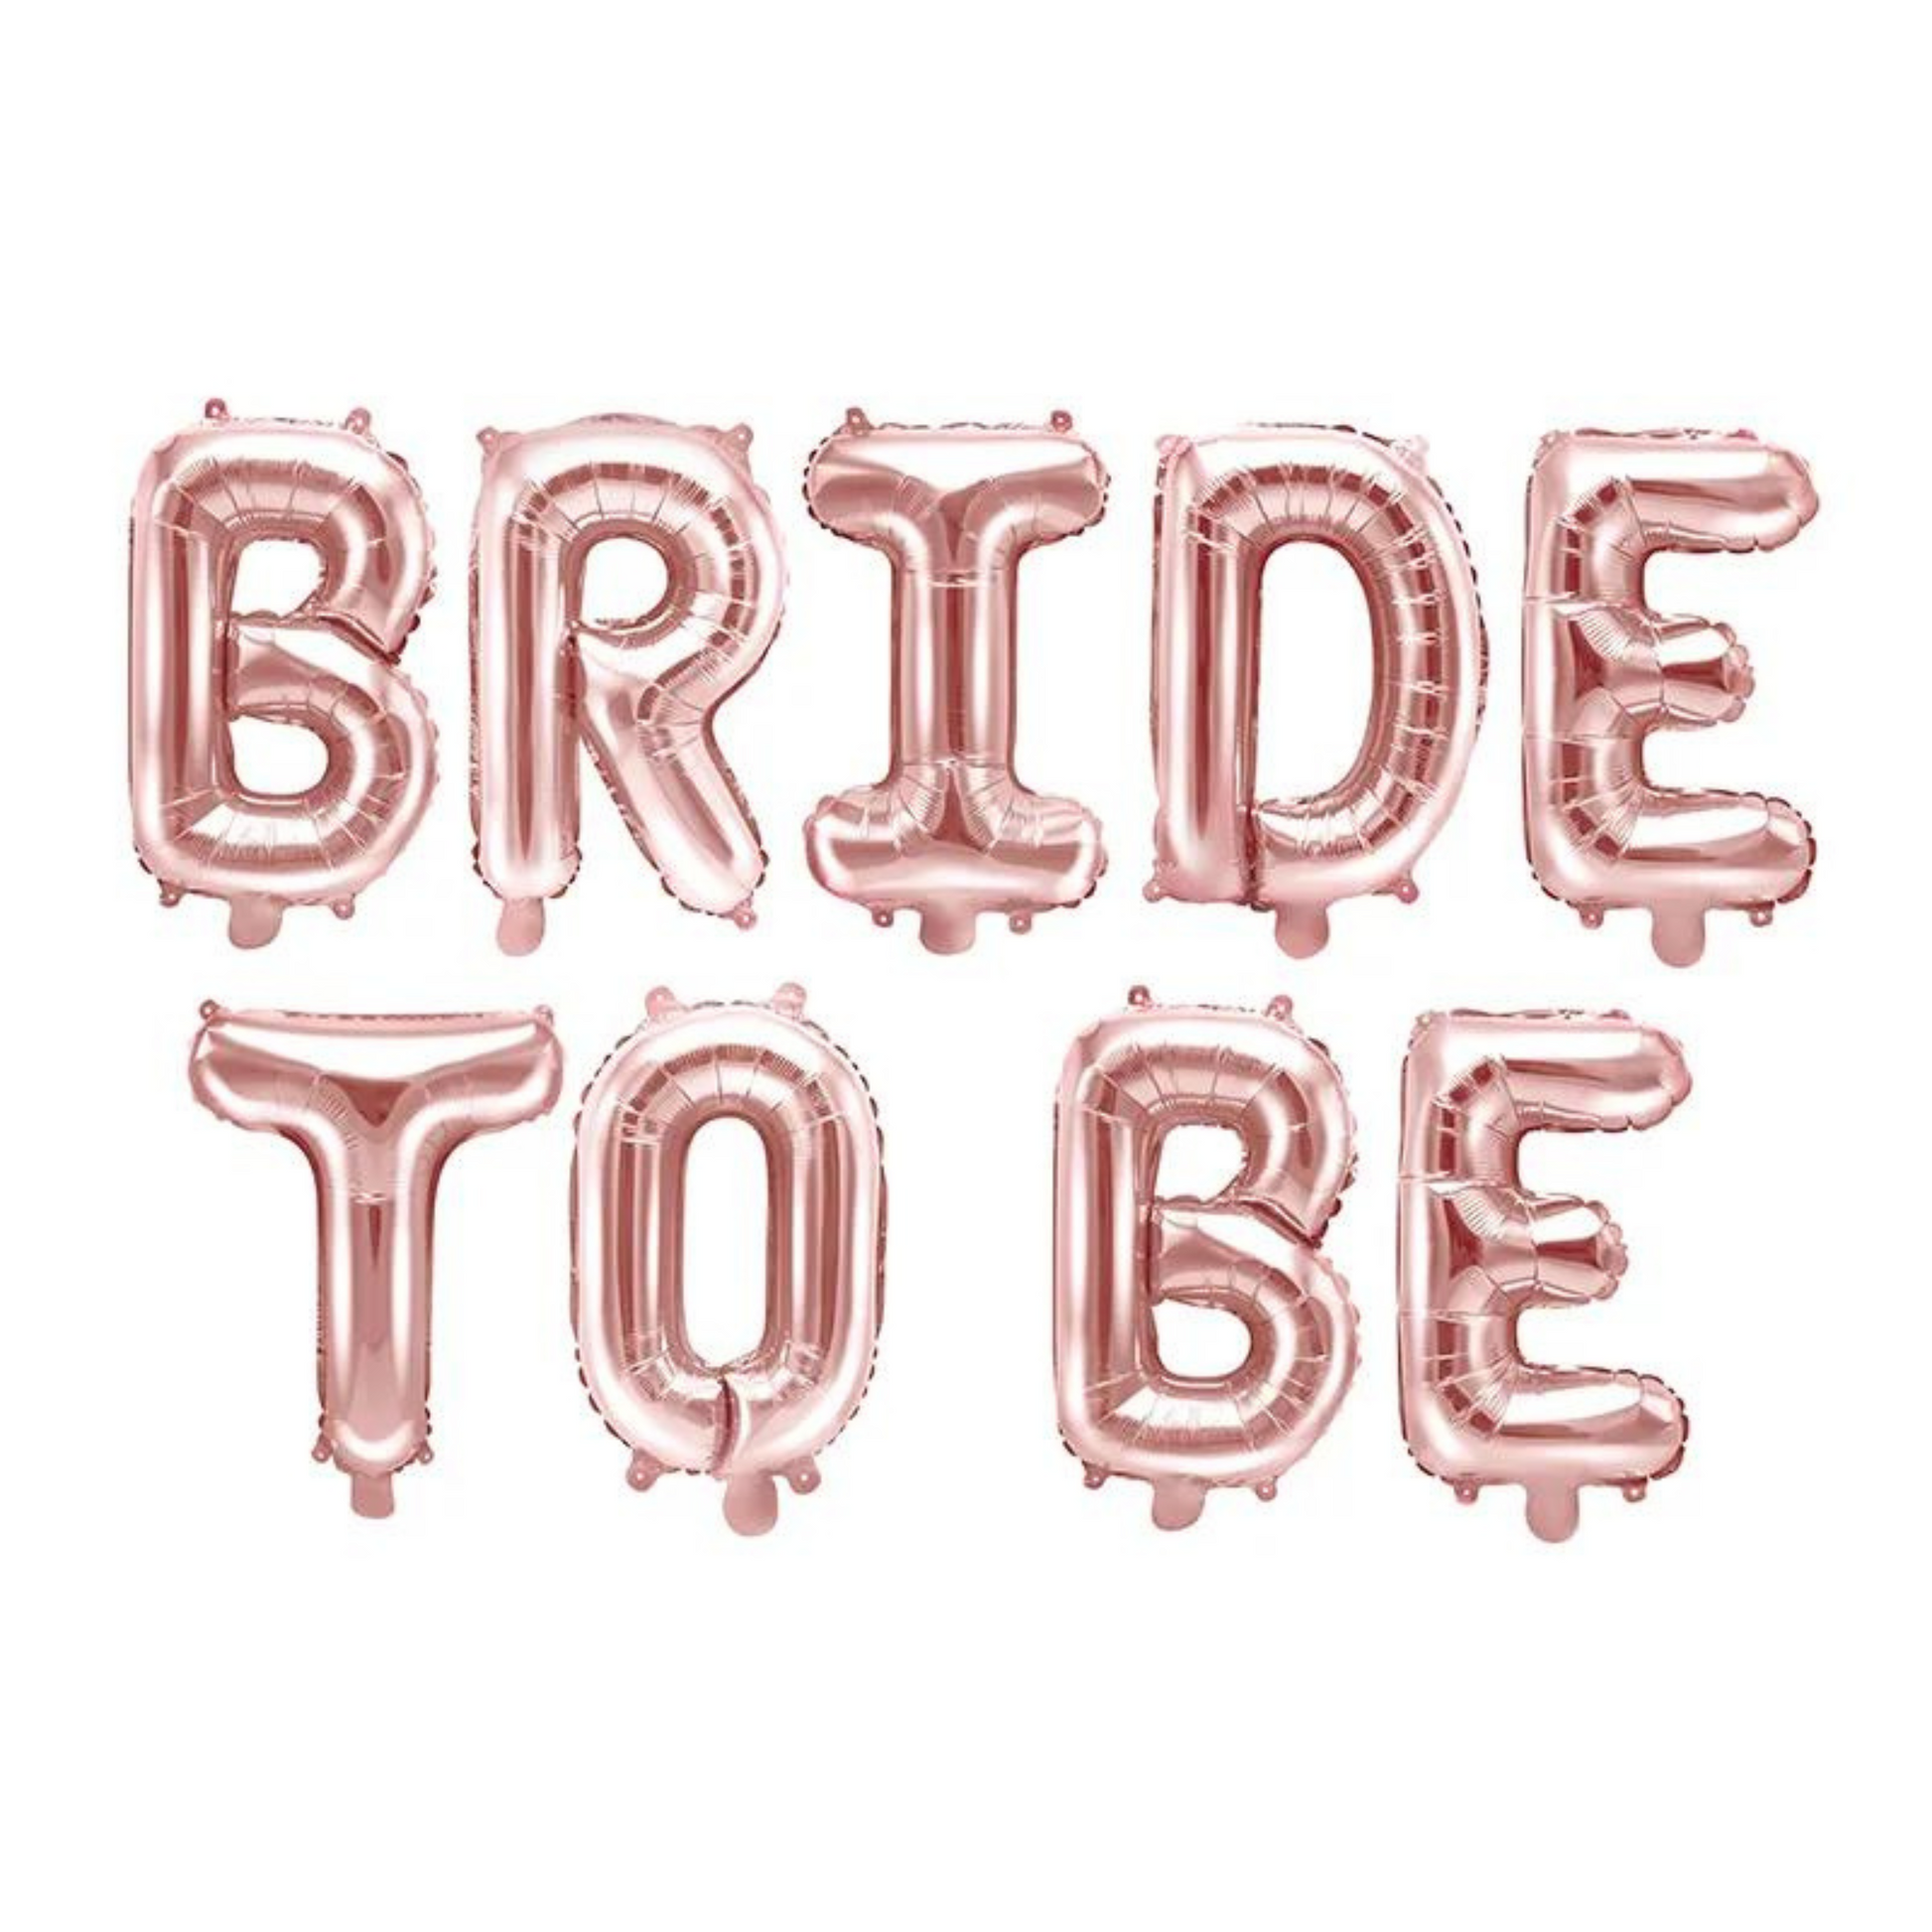 foil balloon banner spelling out BRIDE TO BE